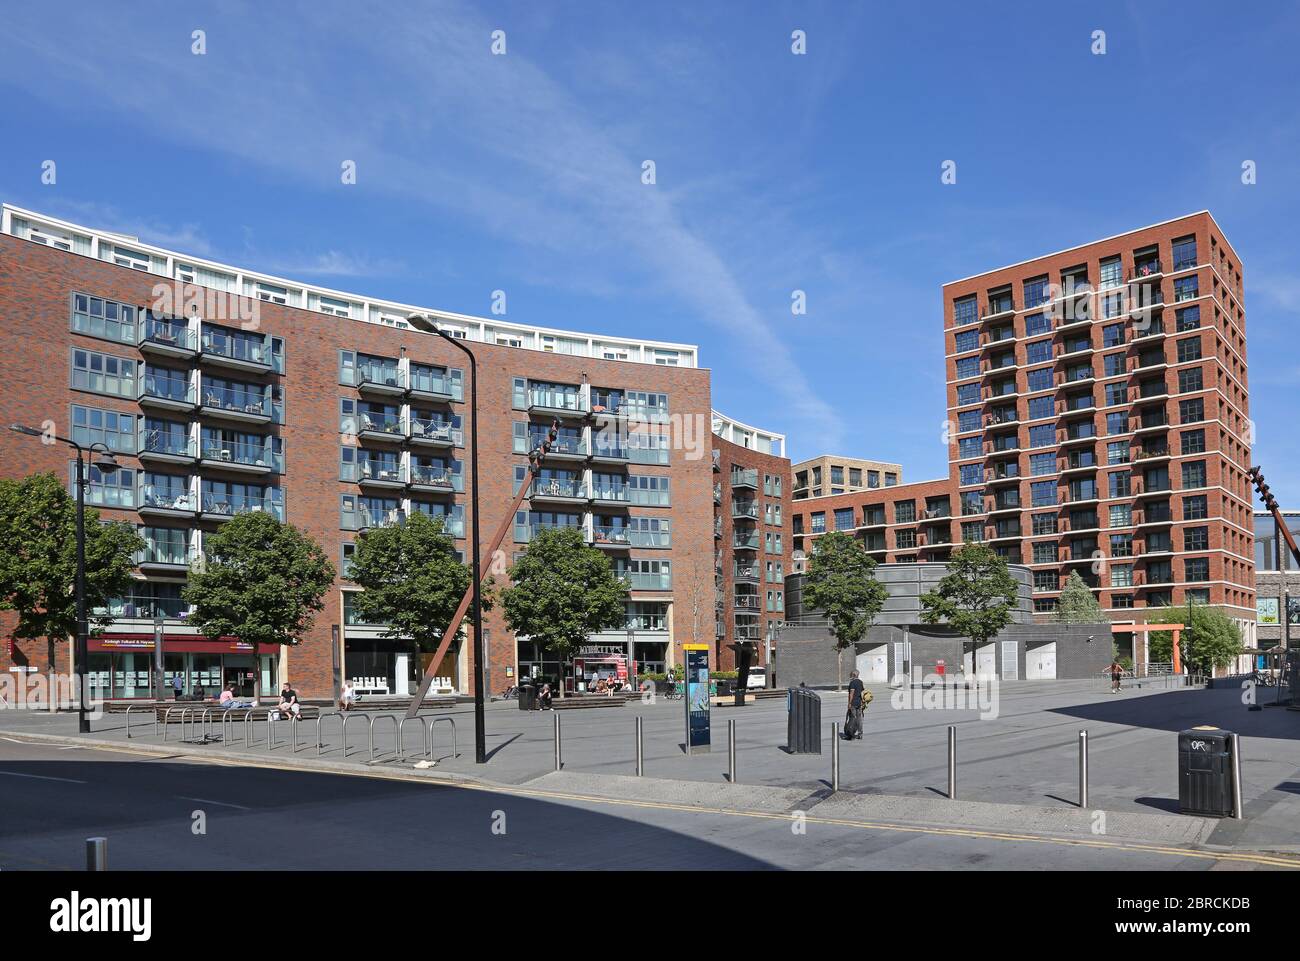 Canada Water, London. A new residential area developed in the 1980s on the site of the old Surrey Docks. Stock Photo